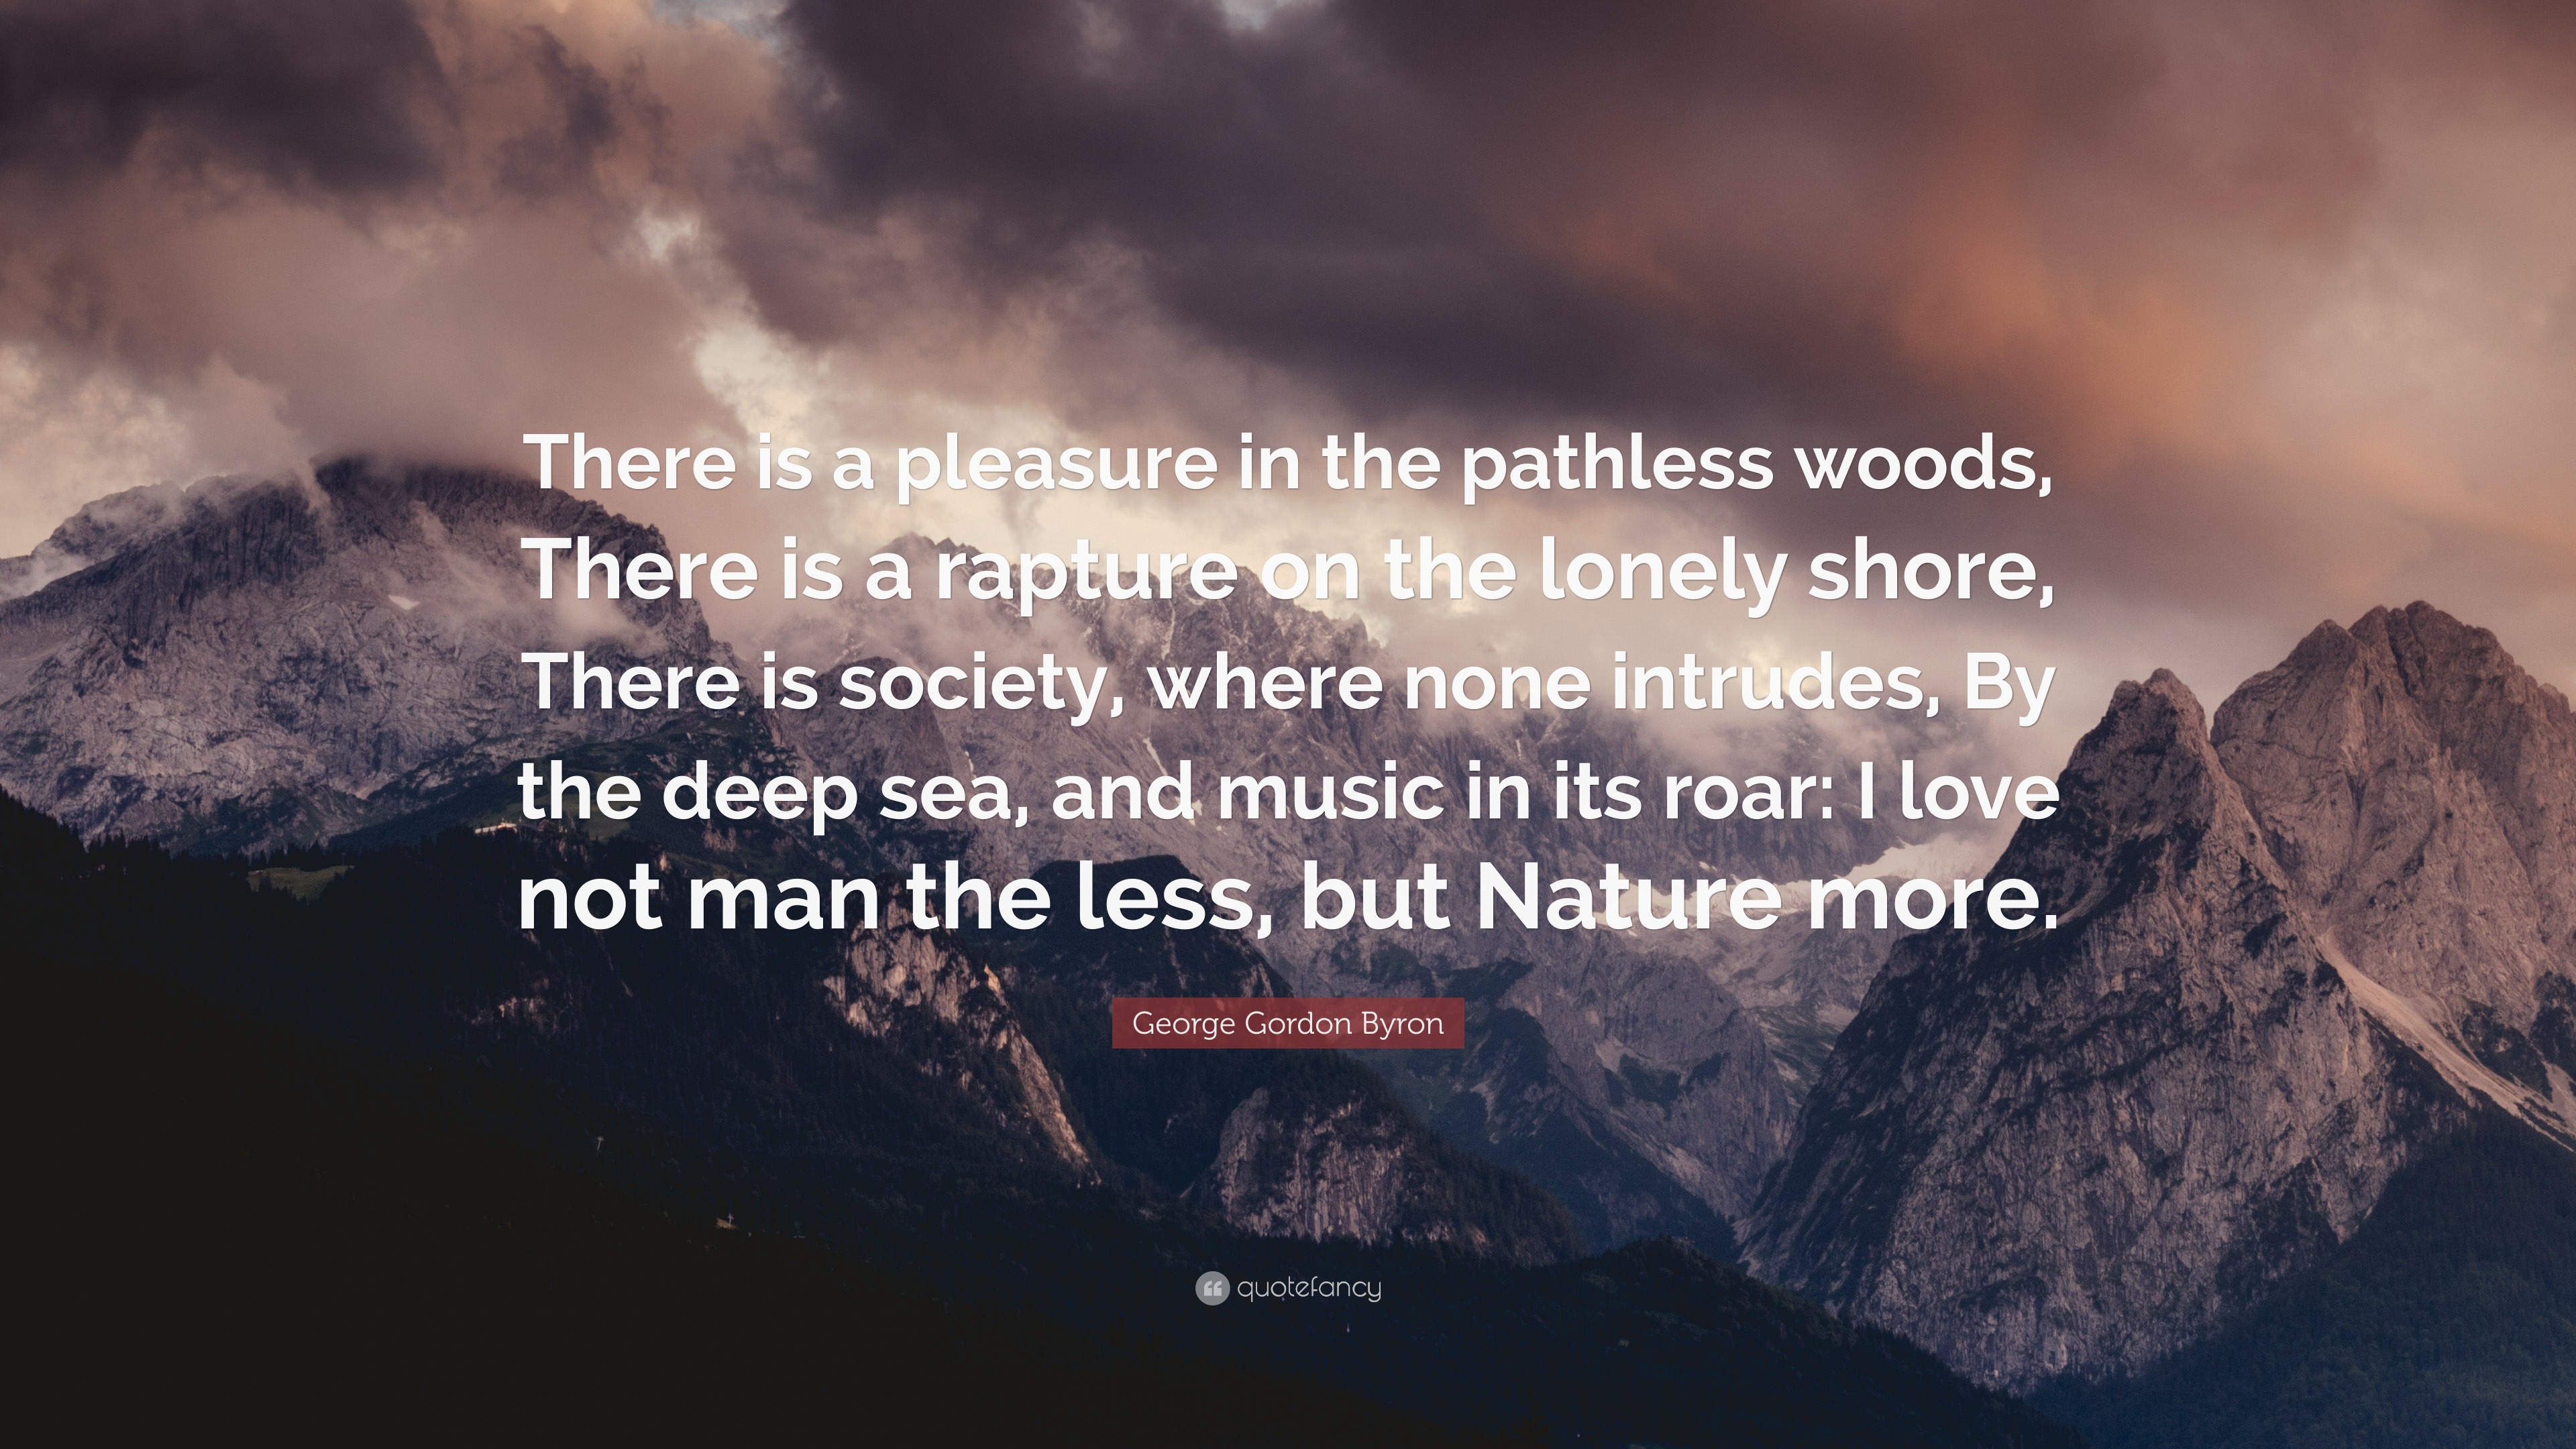 lord byron there is a pleasure in the pathless woods